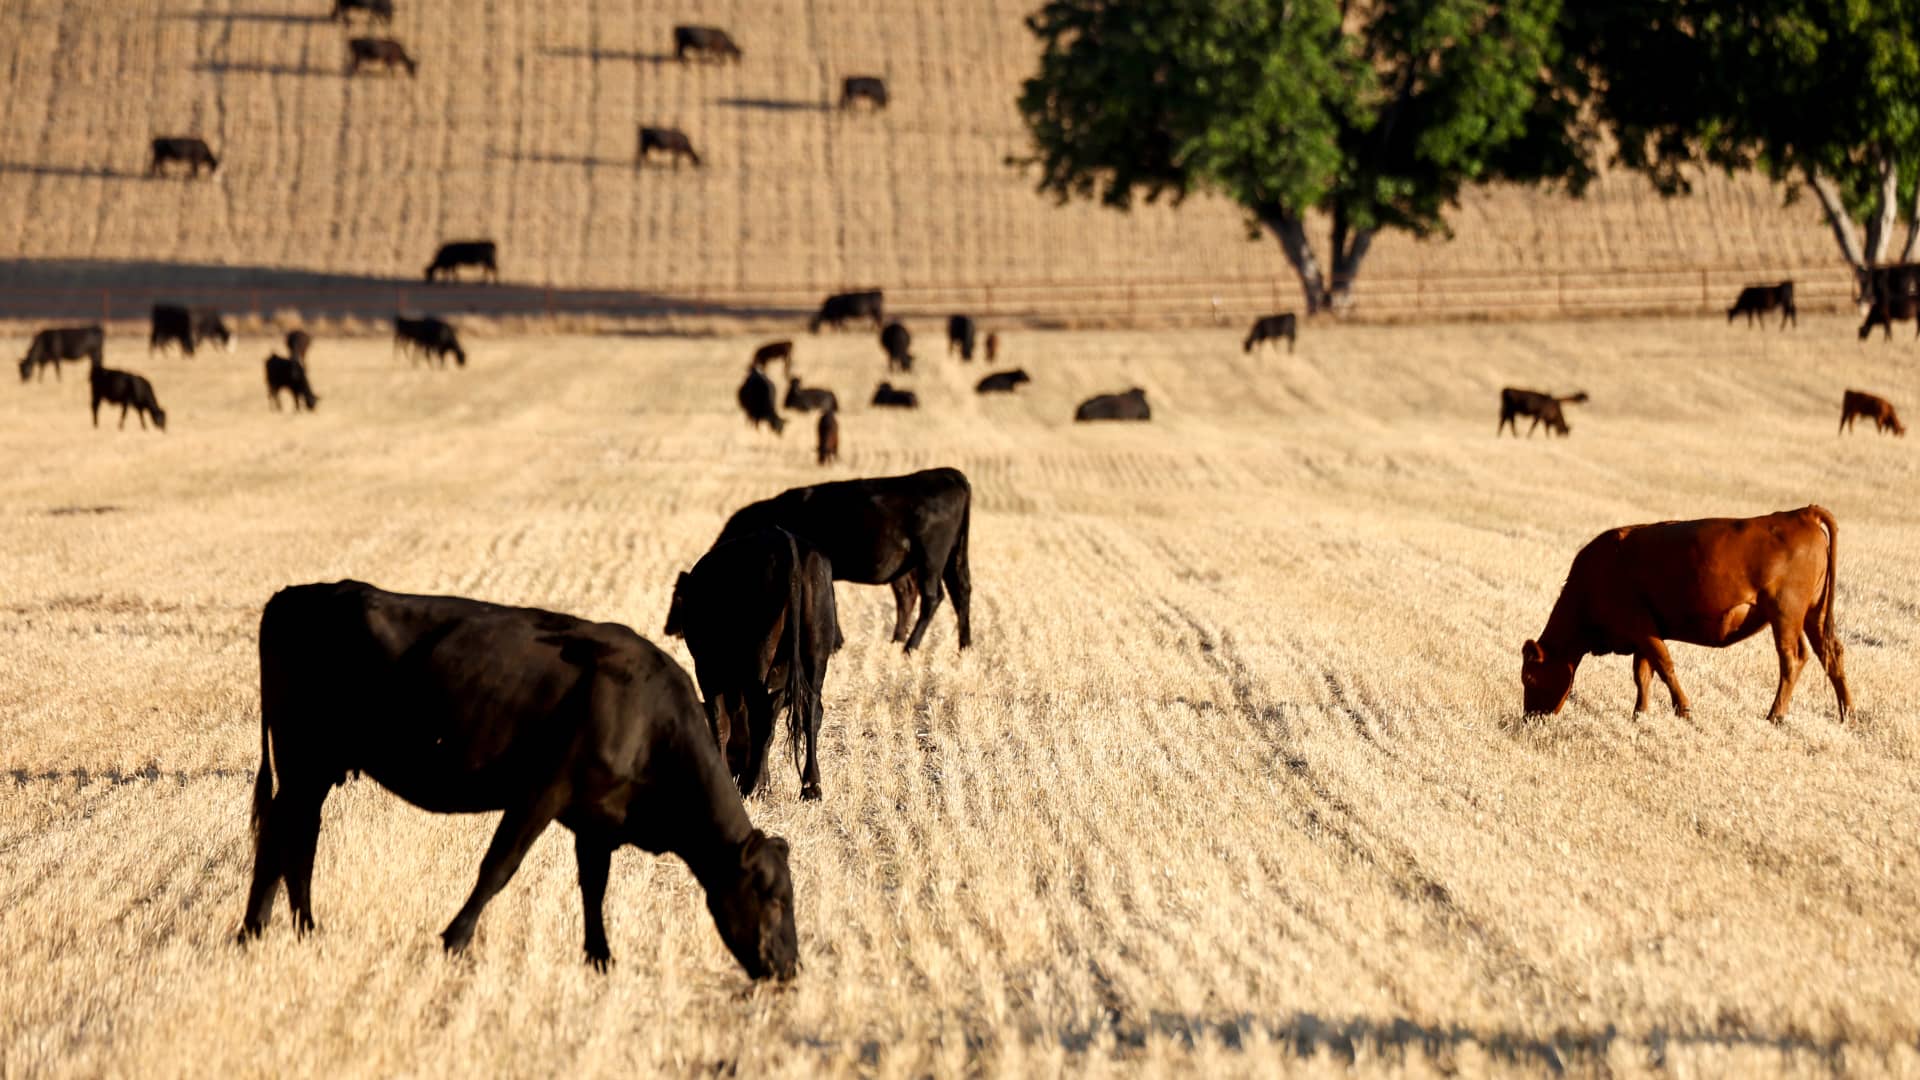 Cattle graze amid drought conditions on June 21, 2022 near Ojai, California. According to the U.S. Drought Monitor, most of Ventura County is currently under extreme drought conditions. California is now in a third consecutive year of drought amid a climate-change fueled megadrought in the Southwestern United States.